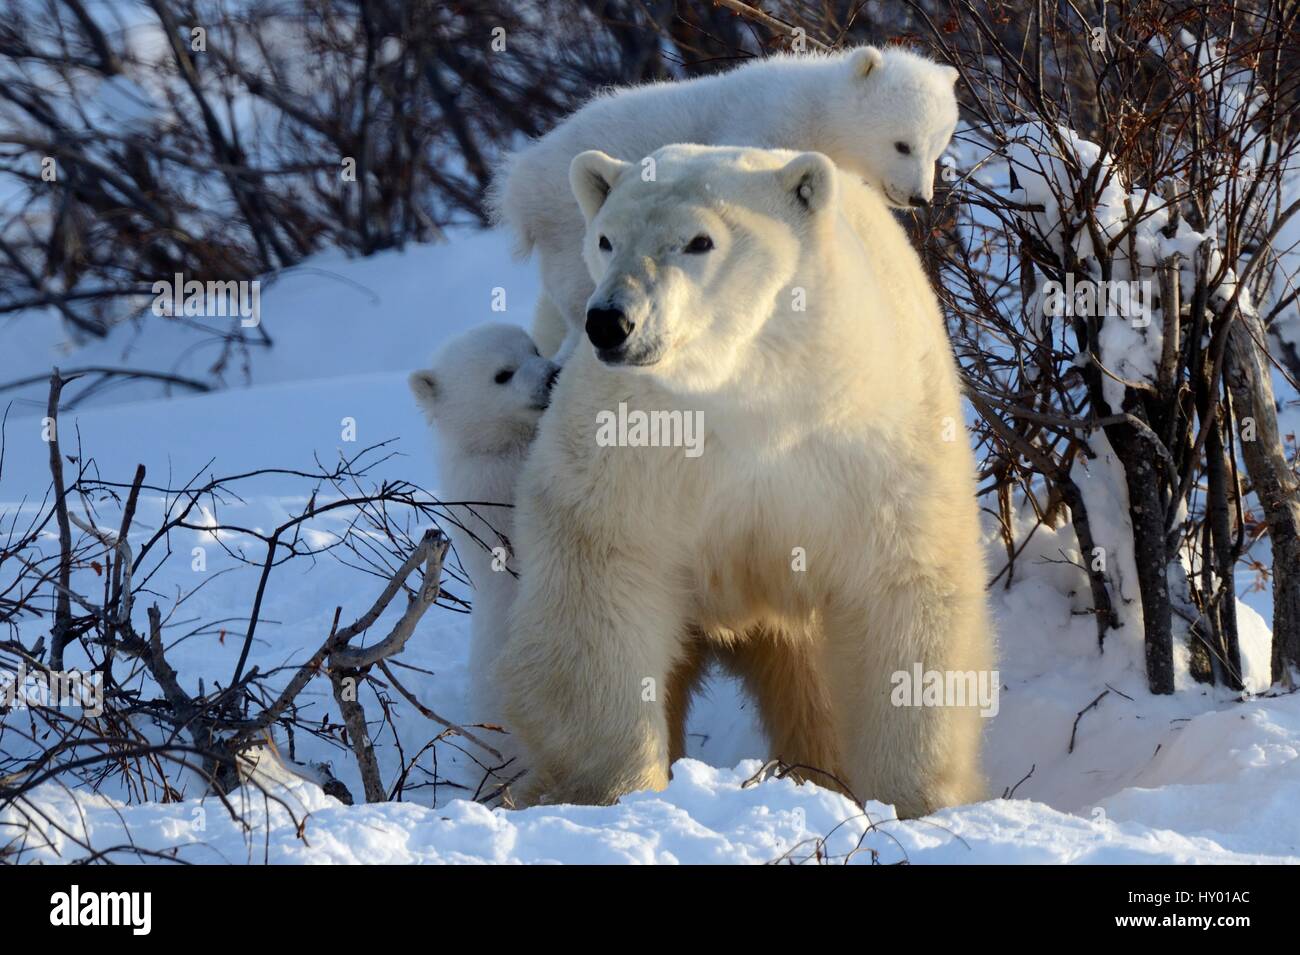 Polar bear (Ursus maritimus) mother with two cubs aged 3 months, playing near den. Wapusk National Park, Manitoba, Canada. Stock Photo